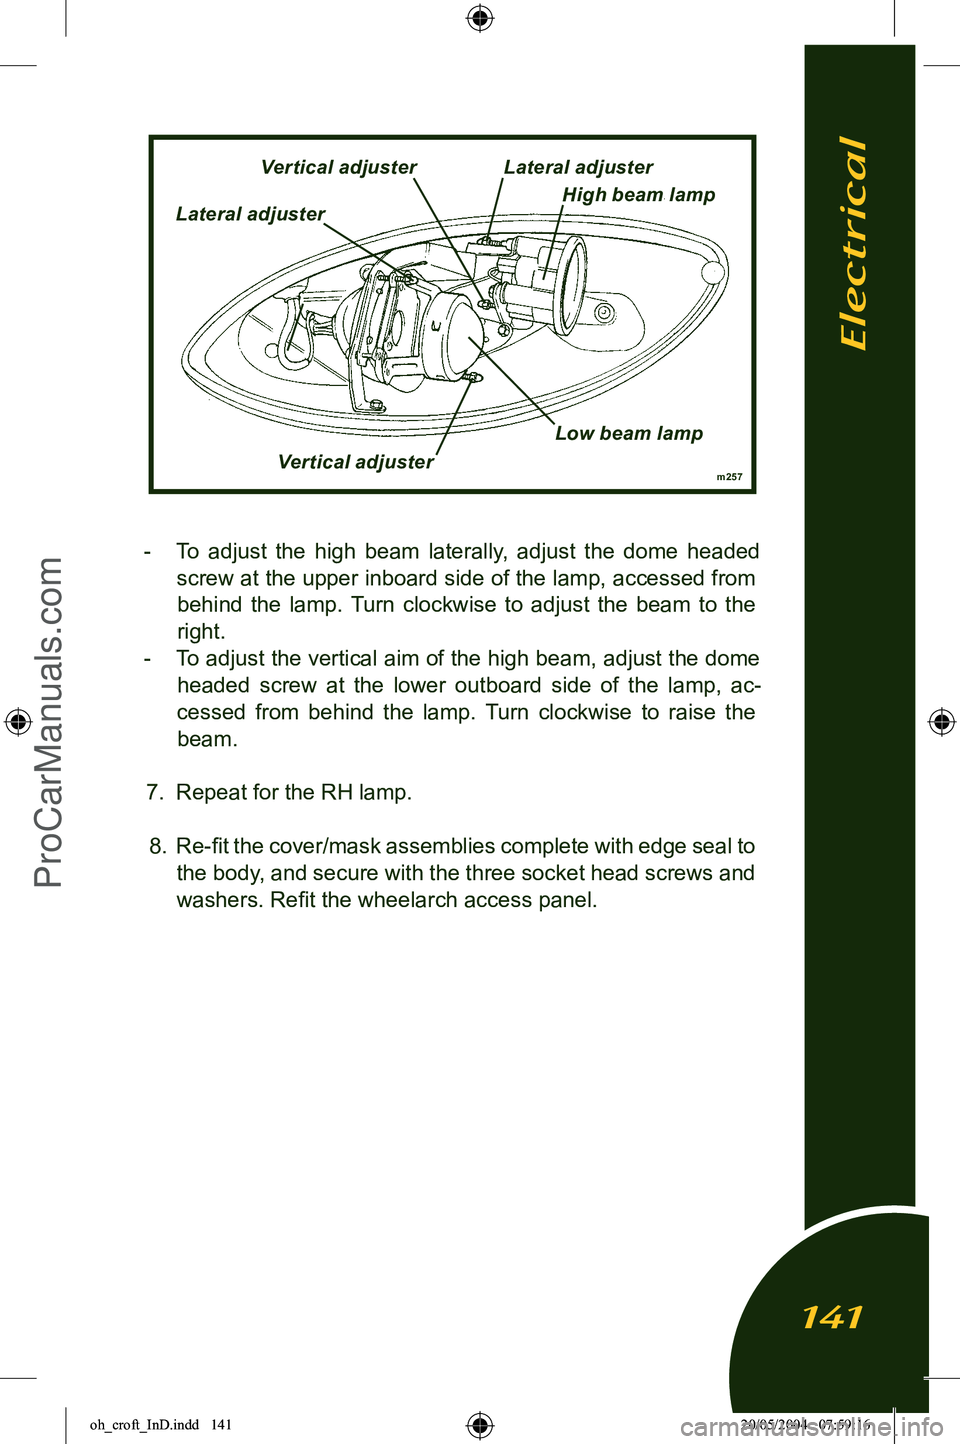 LOTUS ELISE 2005  Owners Manual 
-  To  adjust  the  high  beam  laterally,  adjust  the  dome  headed screw at the upper inboard side of the lamp, accessed from behind  the  lamp.  Turn  clockwise  to  adjust  the  beam  to  the 
r